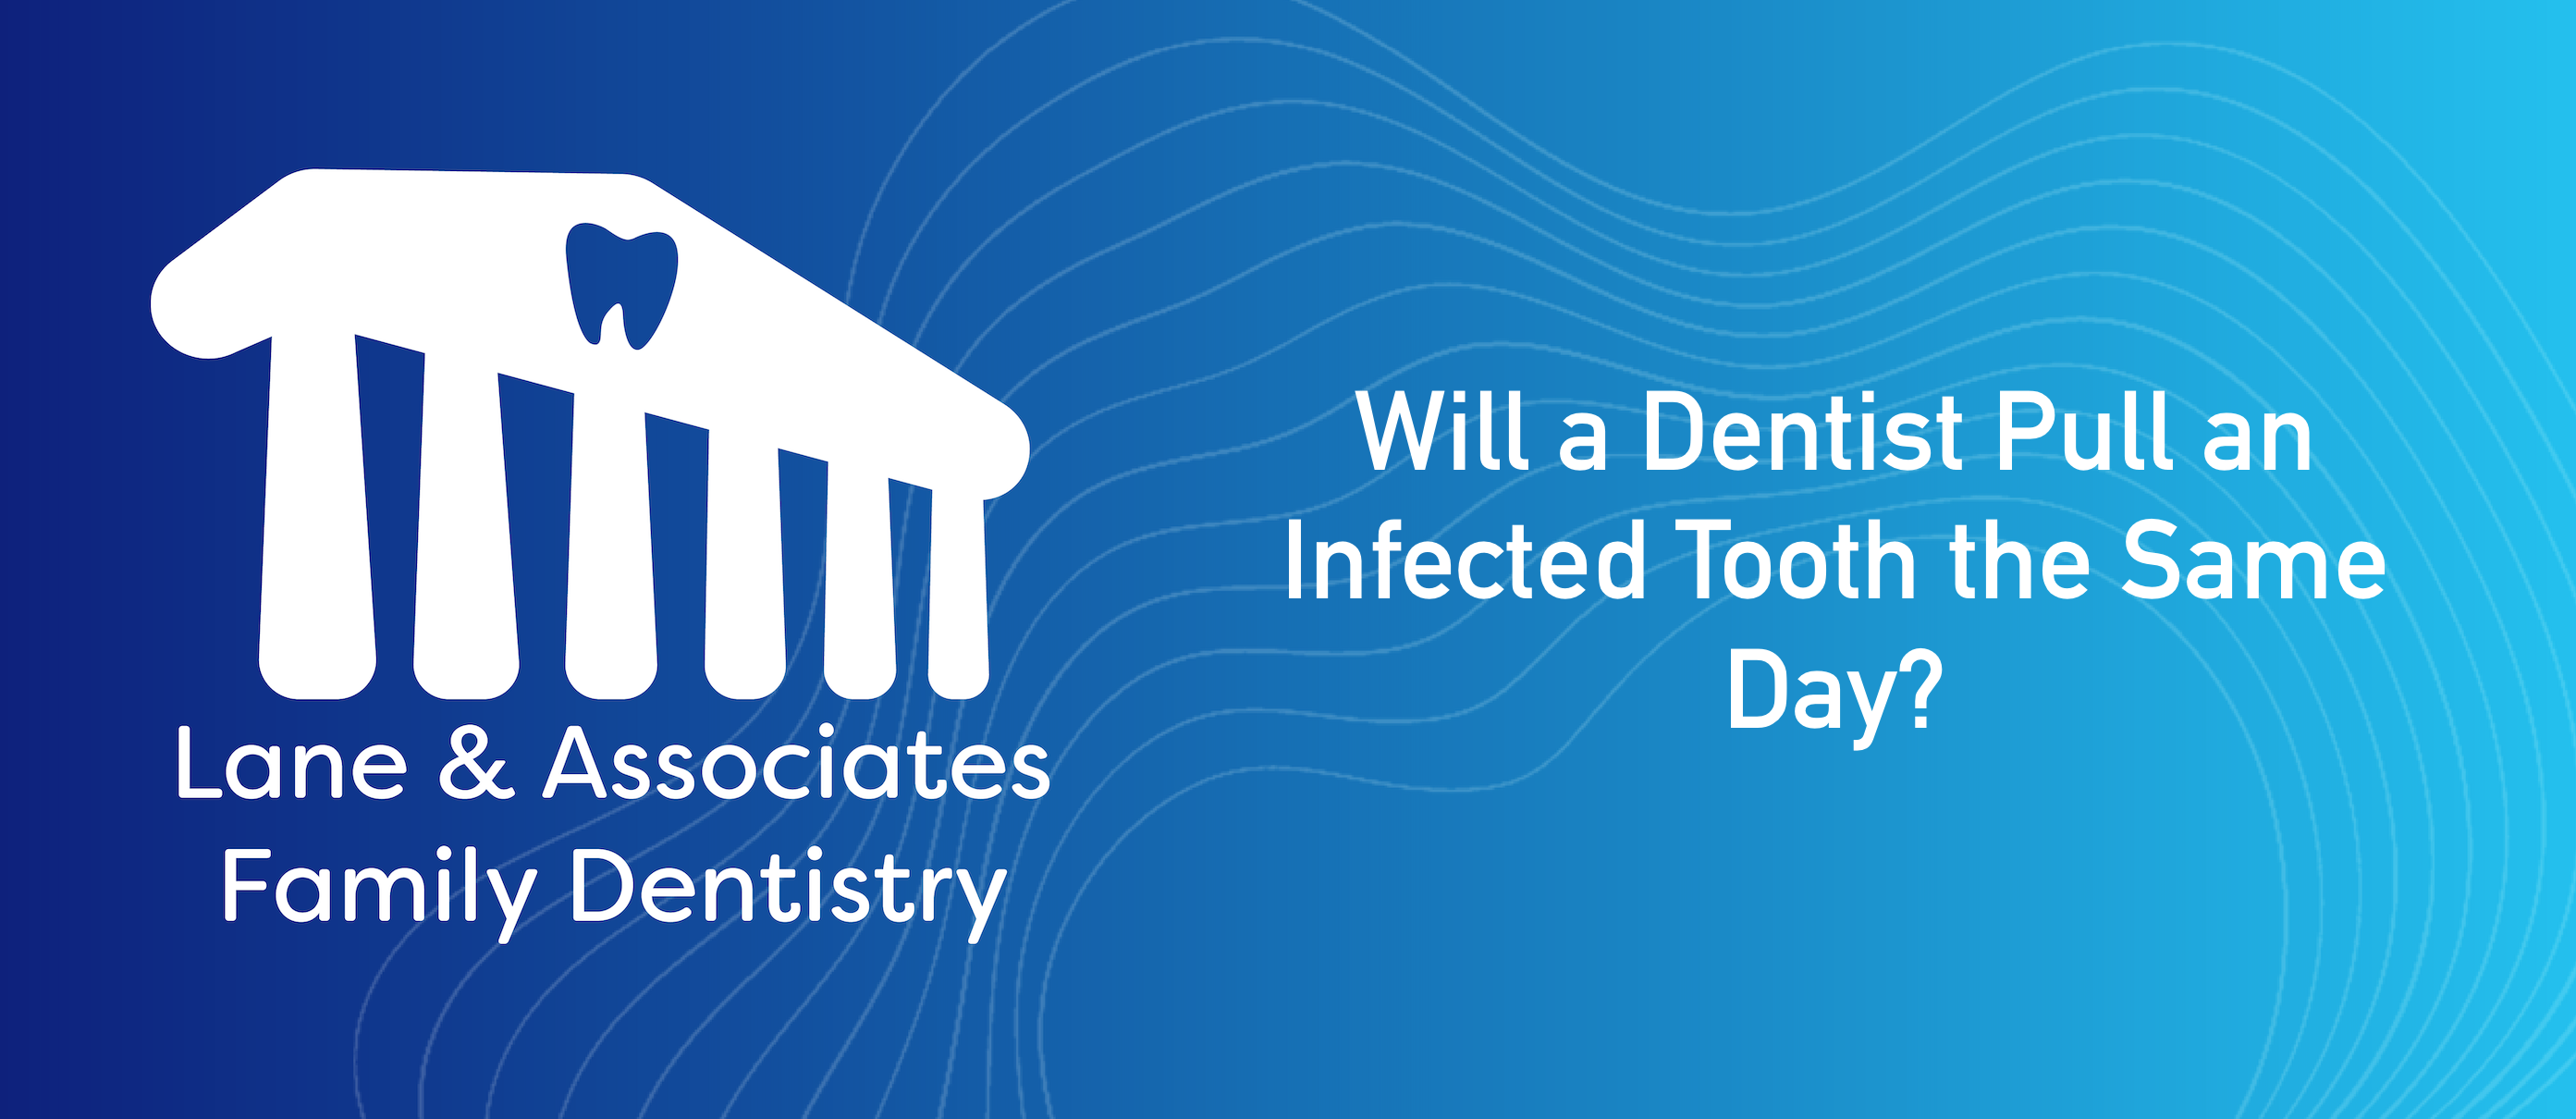 Will a Dentist Pull an Infected Tooth the Same Day?